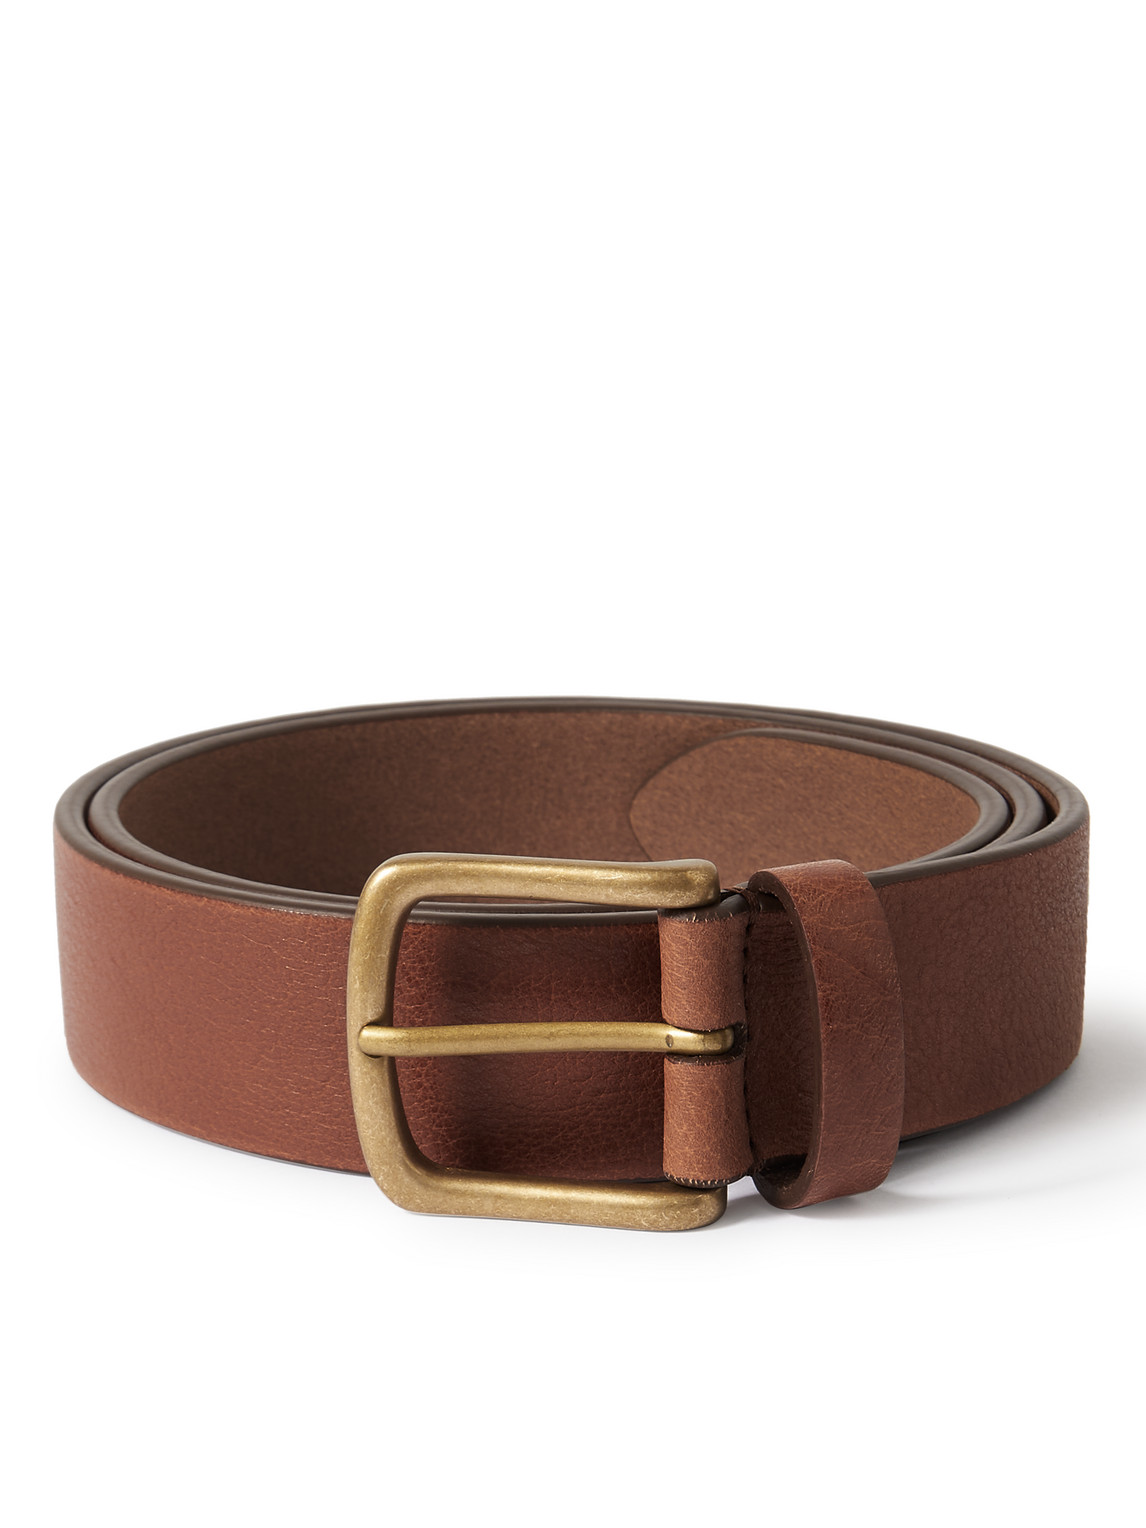 Anderson's 3.5cm Leather Belt In Brown